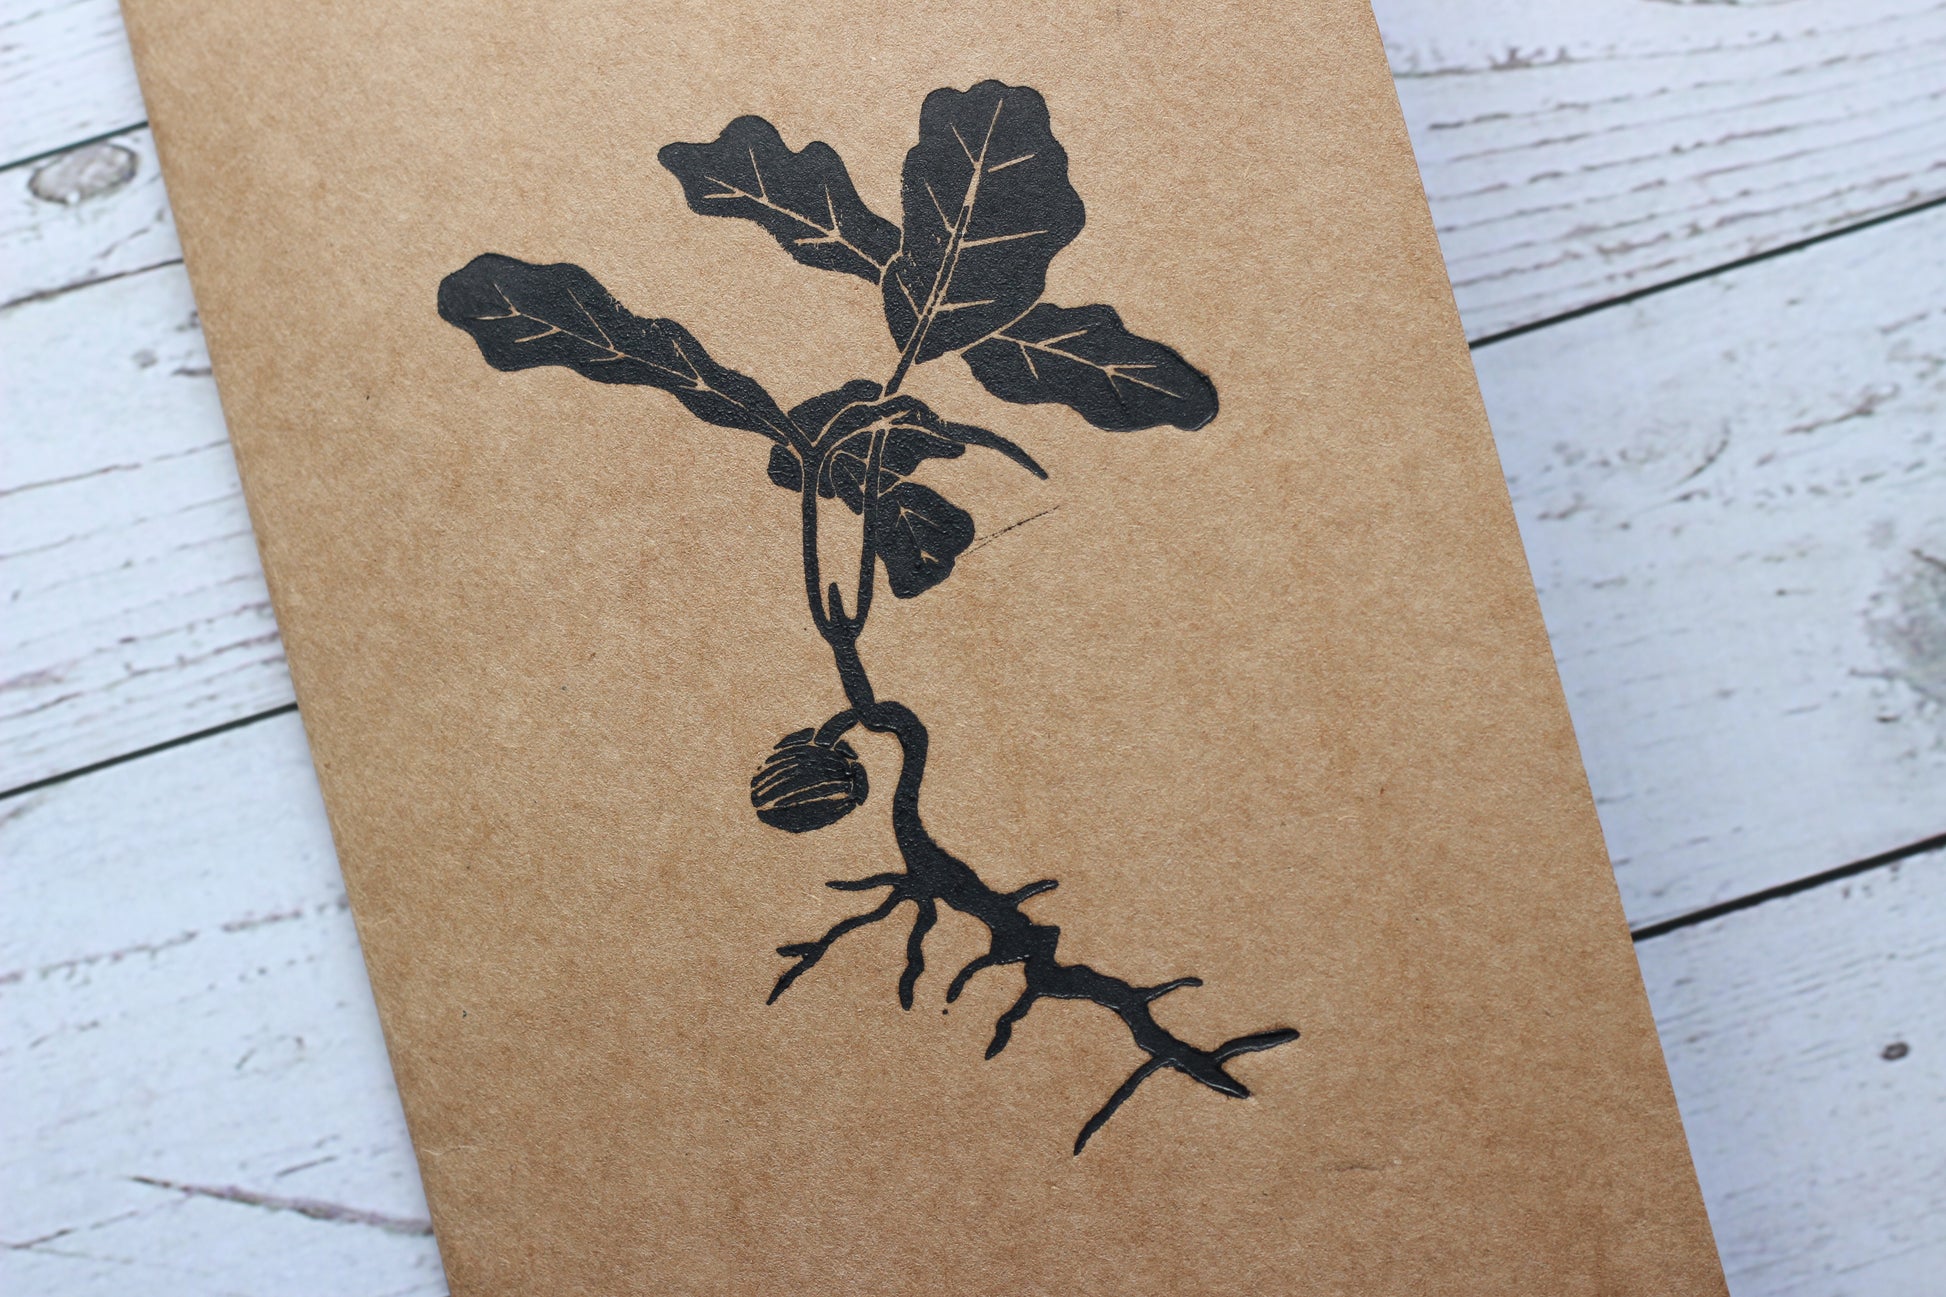 A lino printed sketchbook with a print of an oak sapling on the front